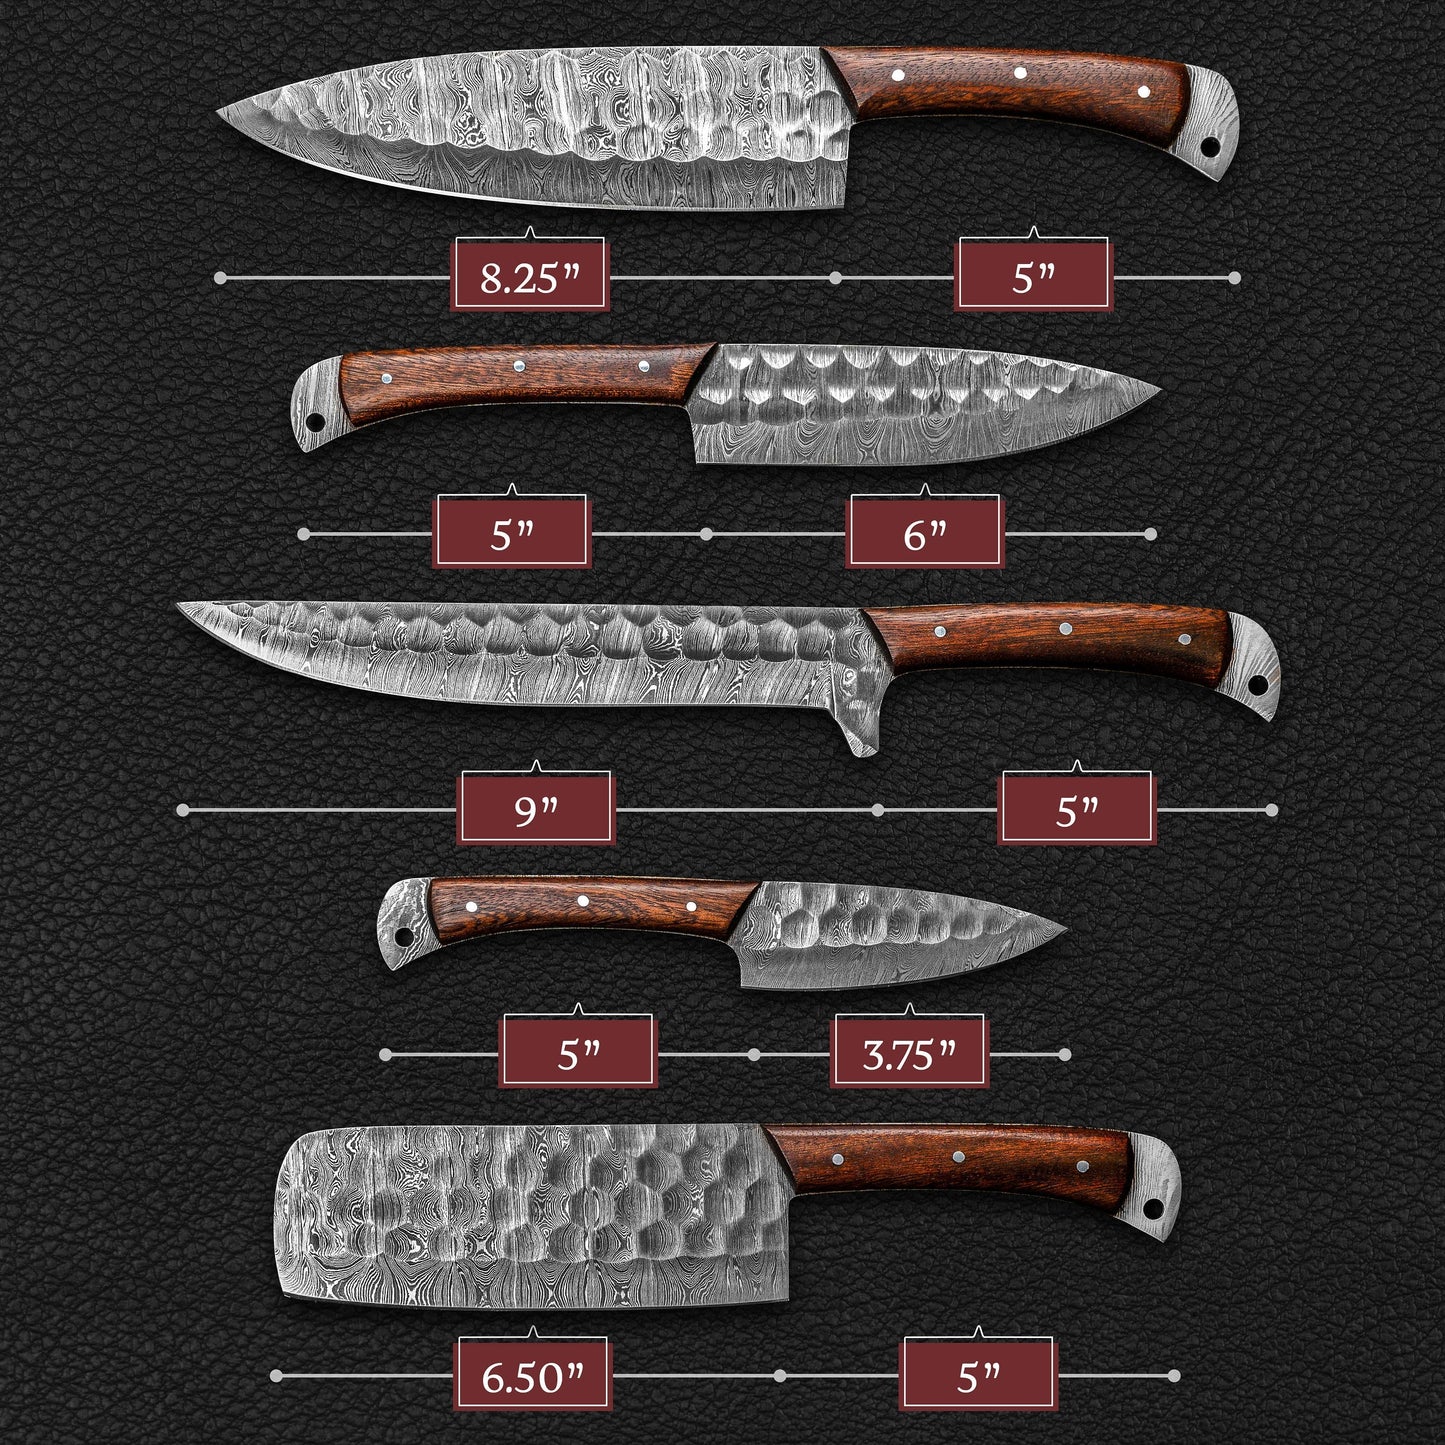 5 pcs Damascus Kitchen Knives Indoor-Outdoor BBQ Cooking Chef Set Knife Full Tang Wood Handle Cleaver Fillet Paring Knife Free Leather Roll - Premium best Happy Valentine Day gift from SCORPION KART - Just $130! Shop now at SCORPION KART